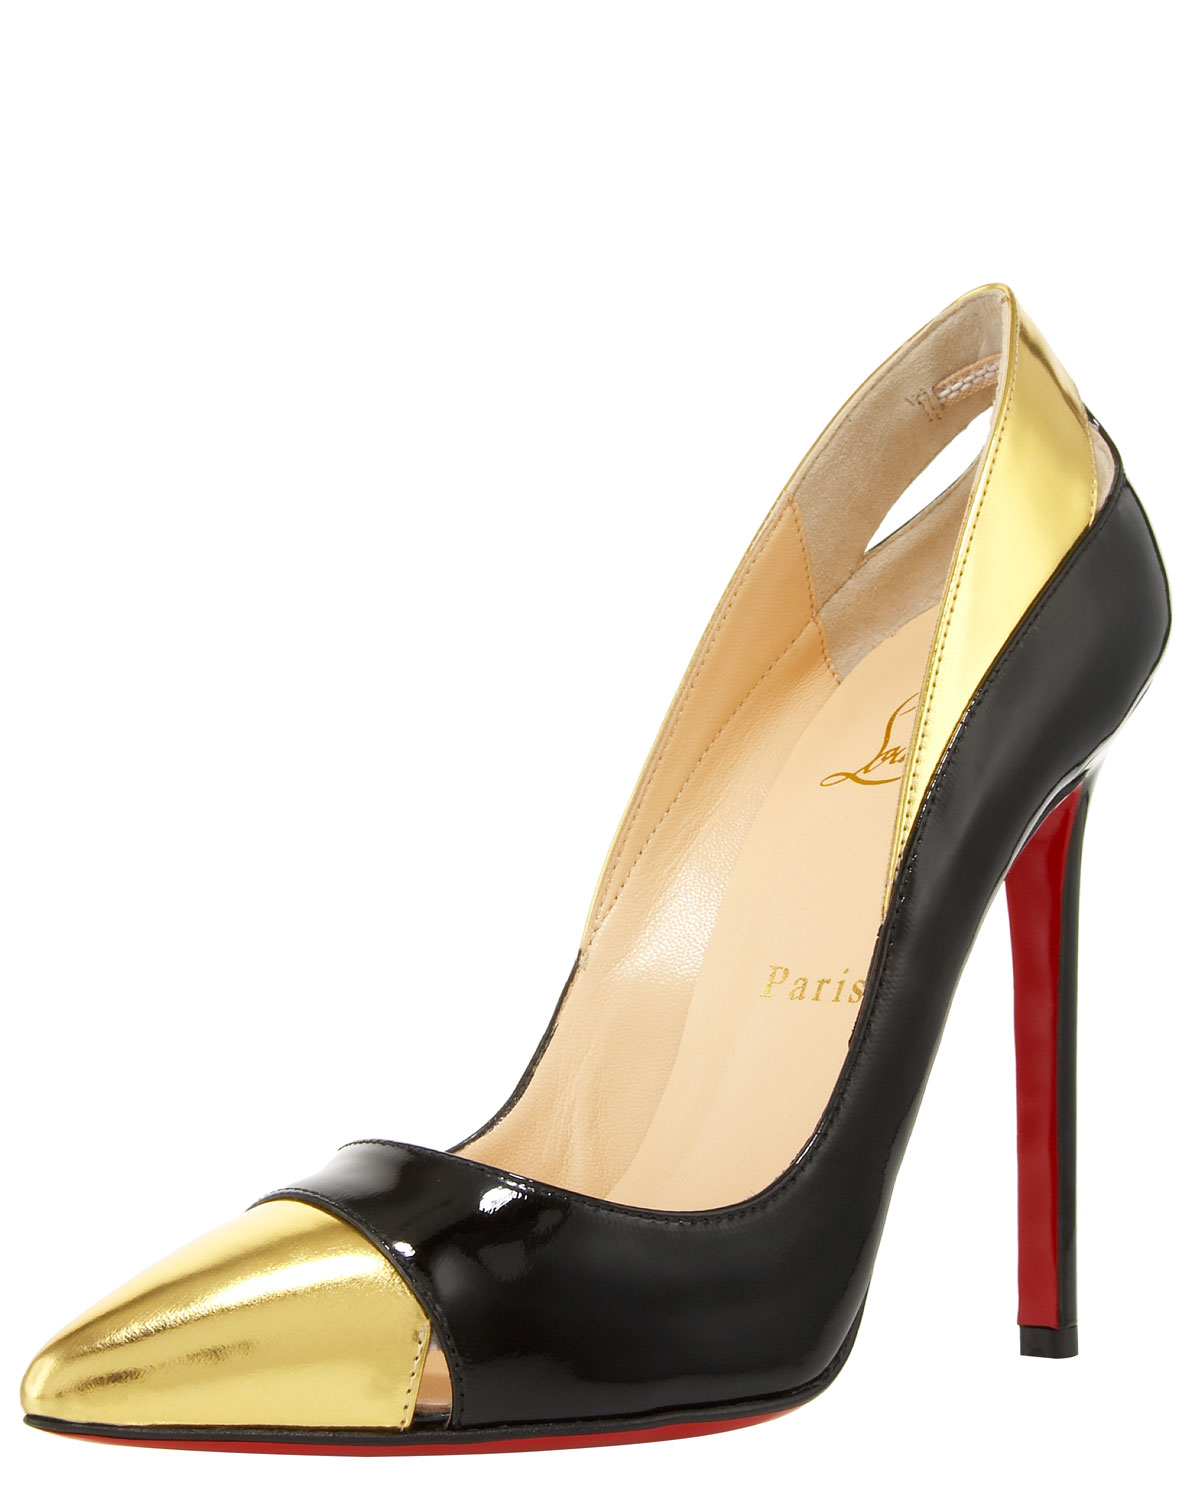 christian louboutin pointed-toe pumps Black suede cutouts | The ...  